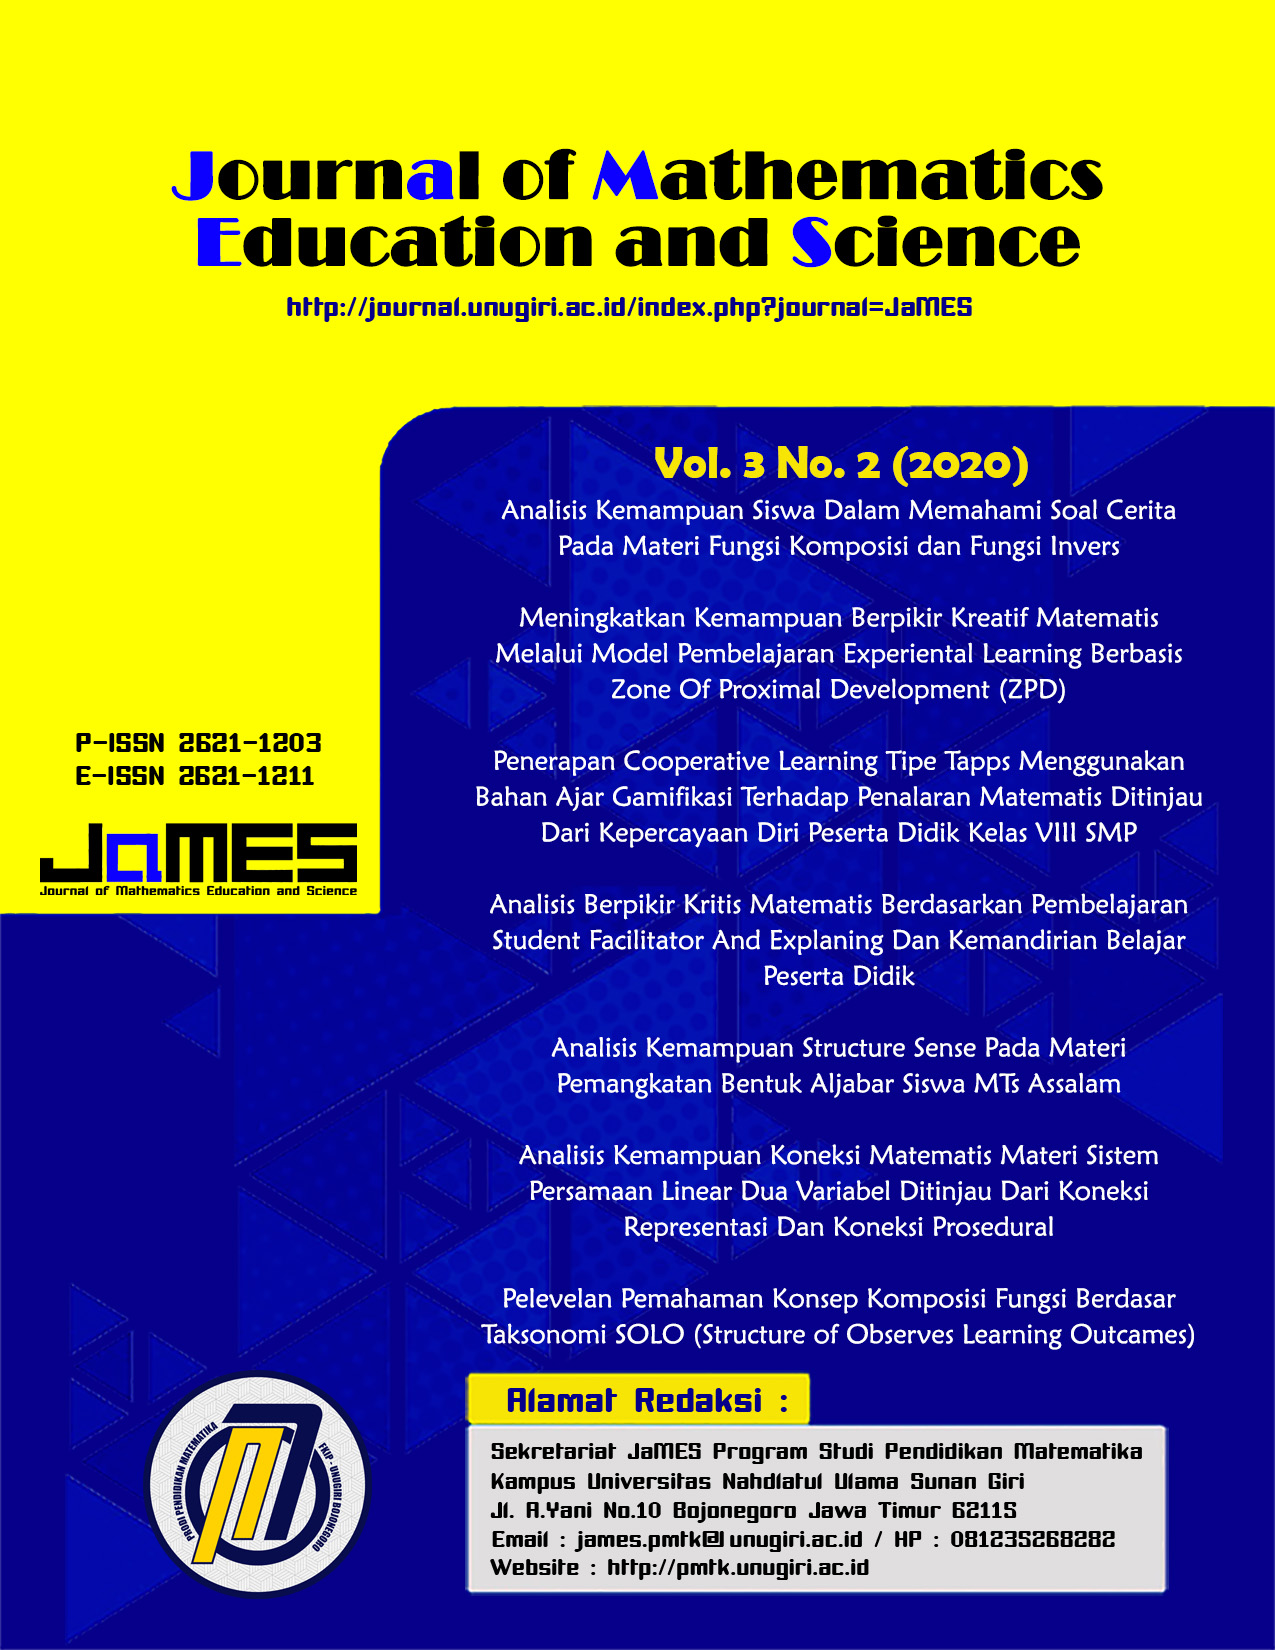 					View Vol. 3 No. 2 (2020): Journal of Mathematics Education and Science
				